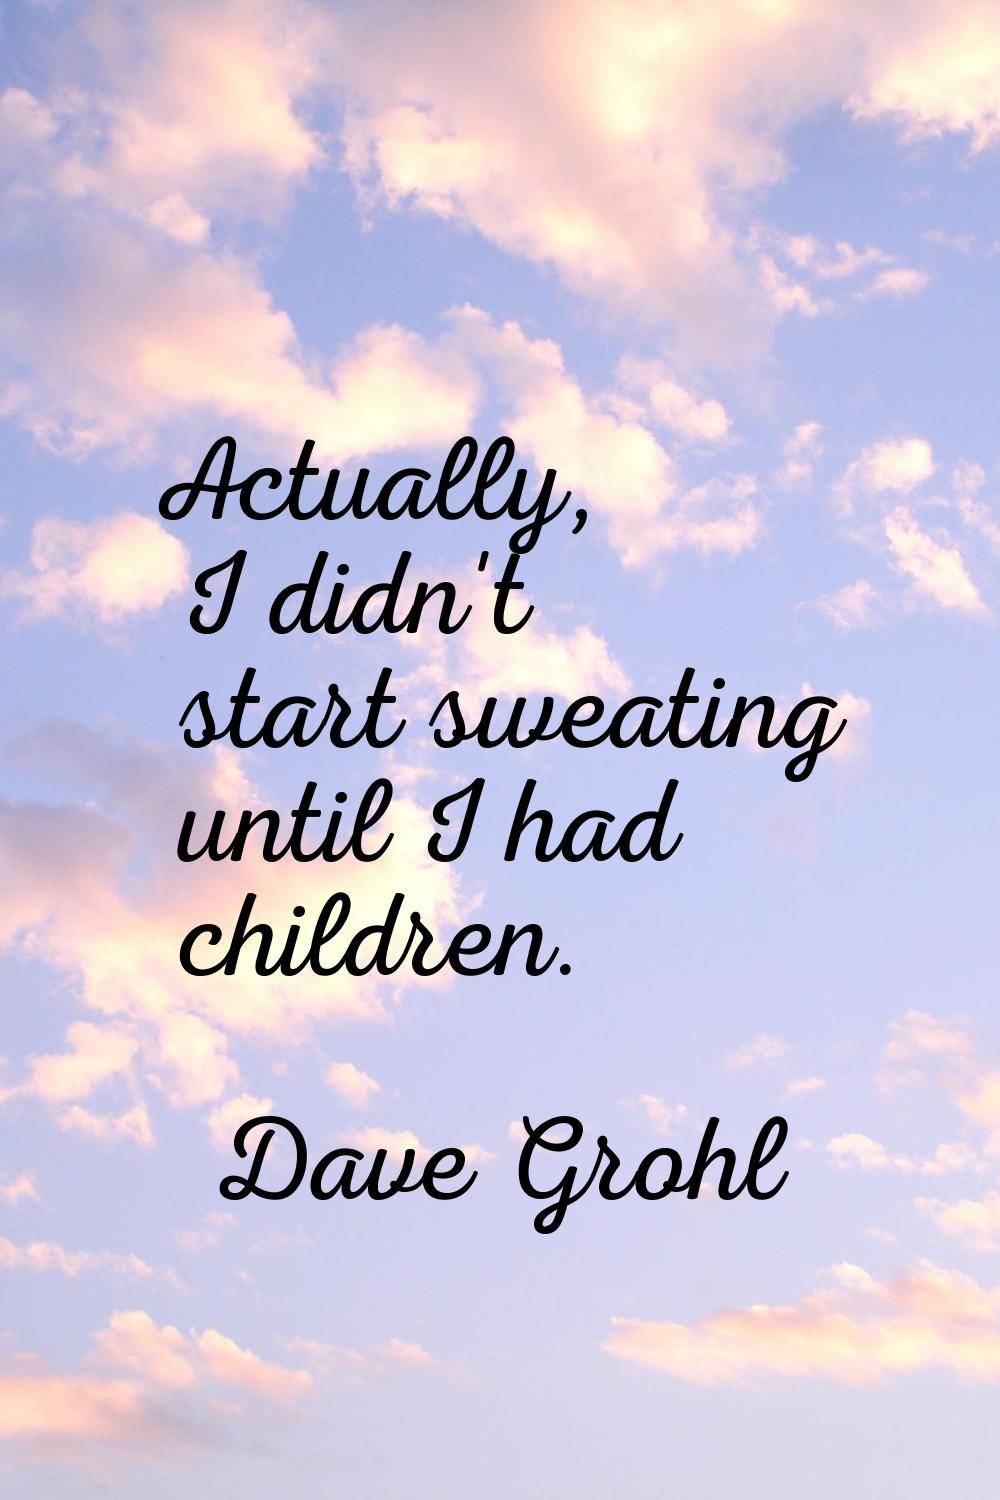 Actually, I didn't start sweating until I had children.